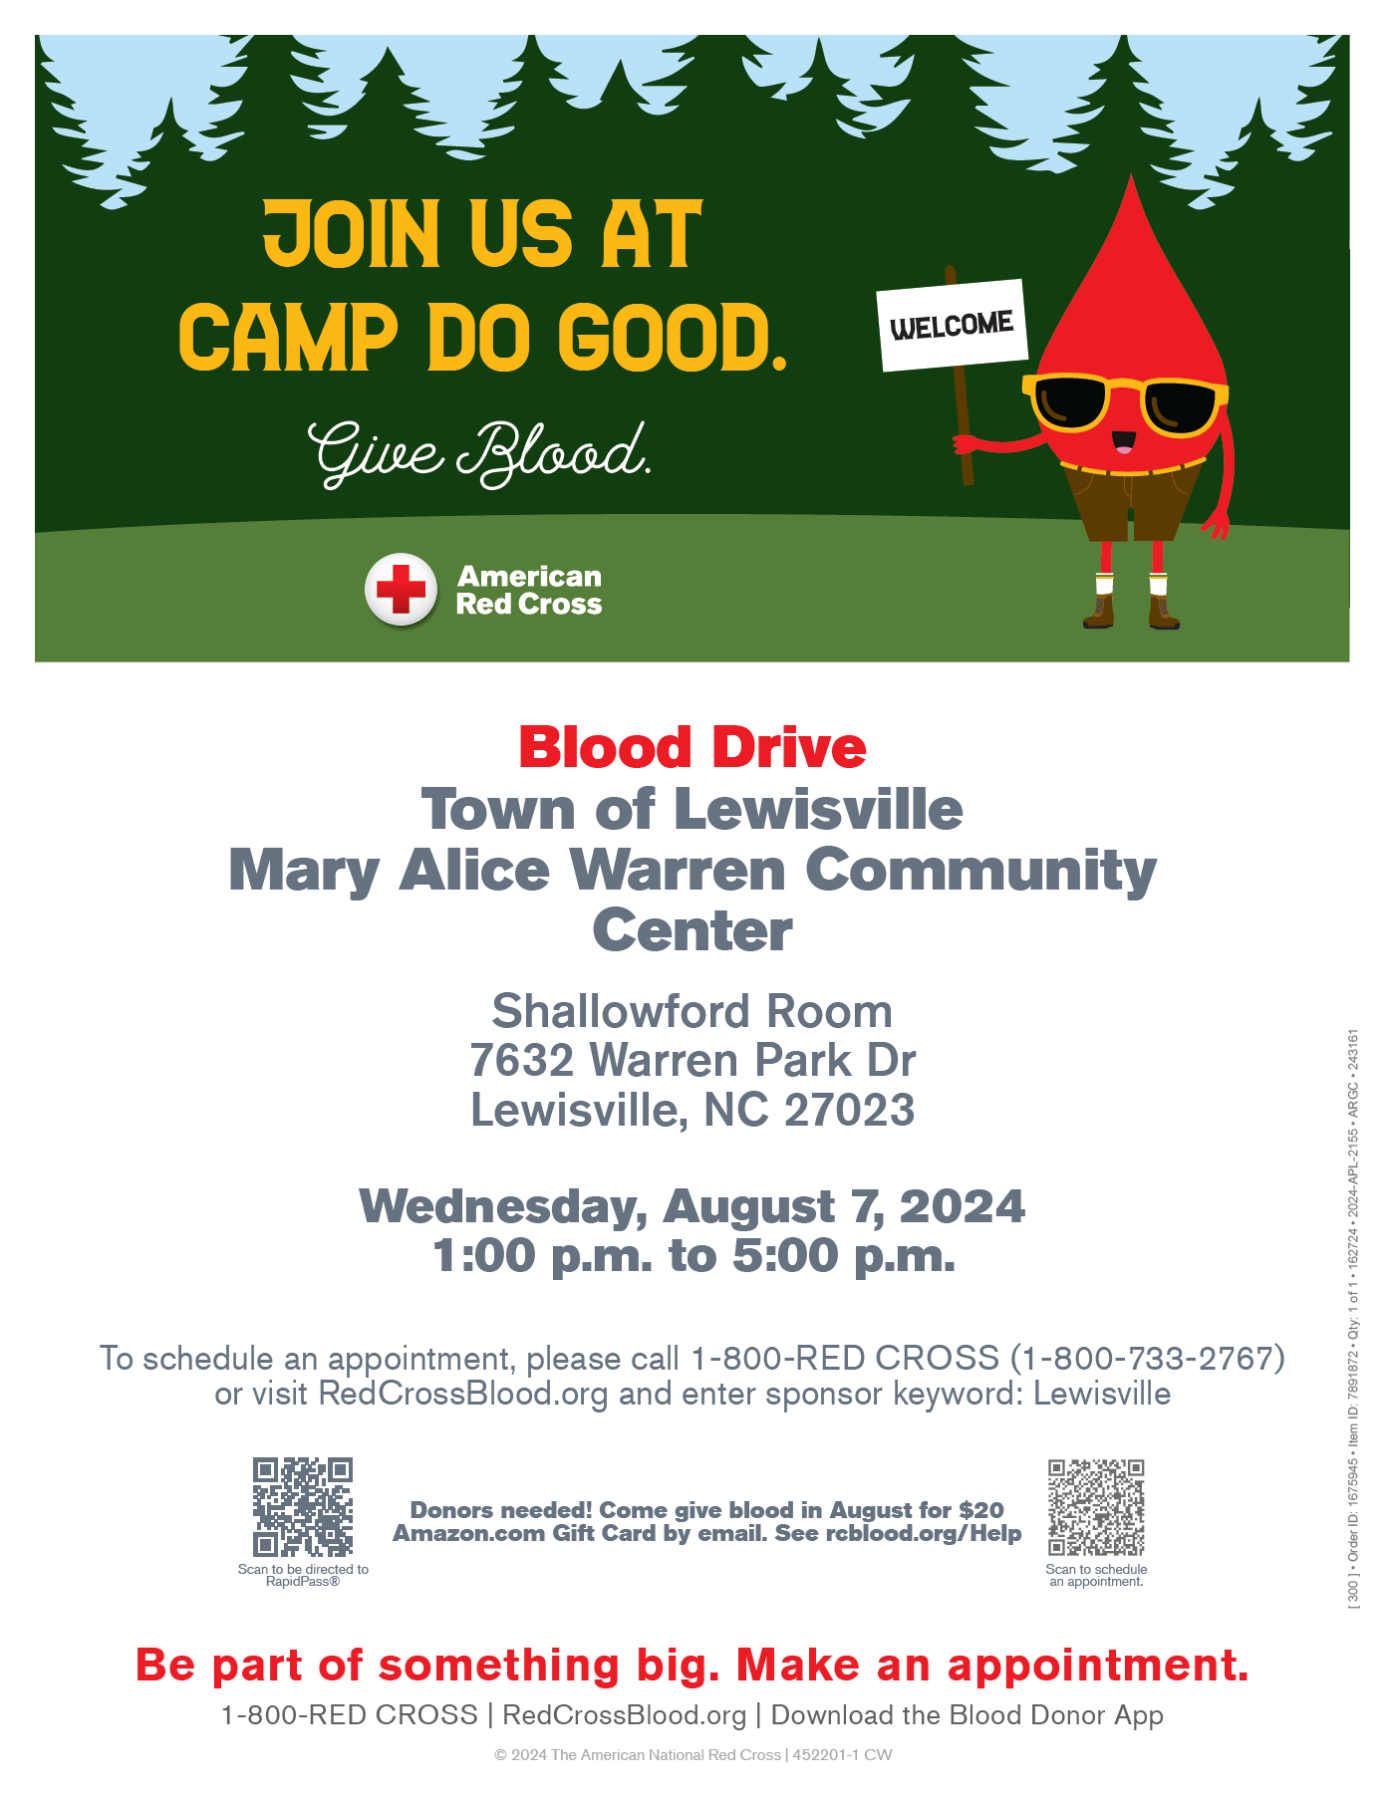 Join us at Camp Do Good. Give Blood at the upcoming Lewisville Blood Drive on August 7